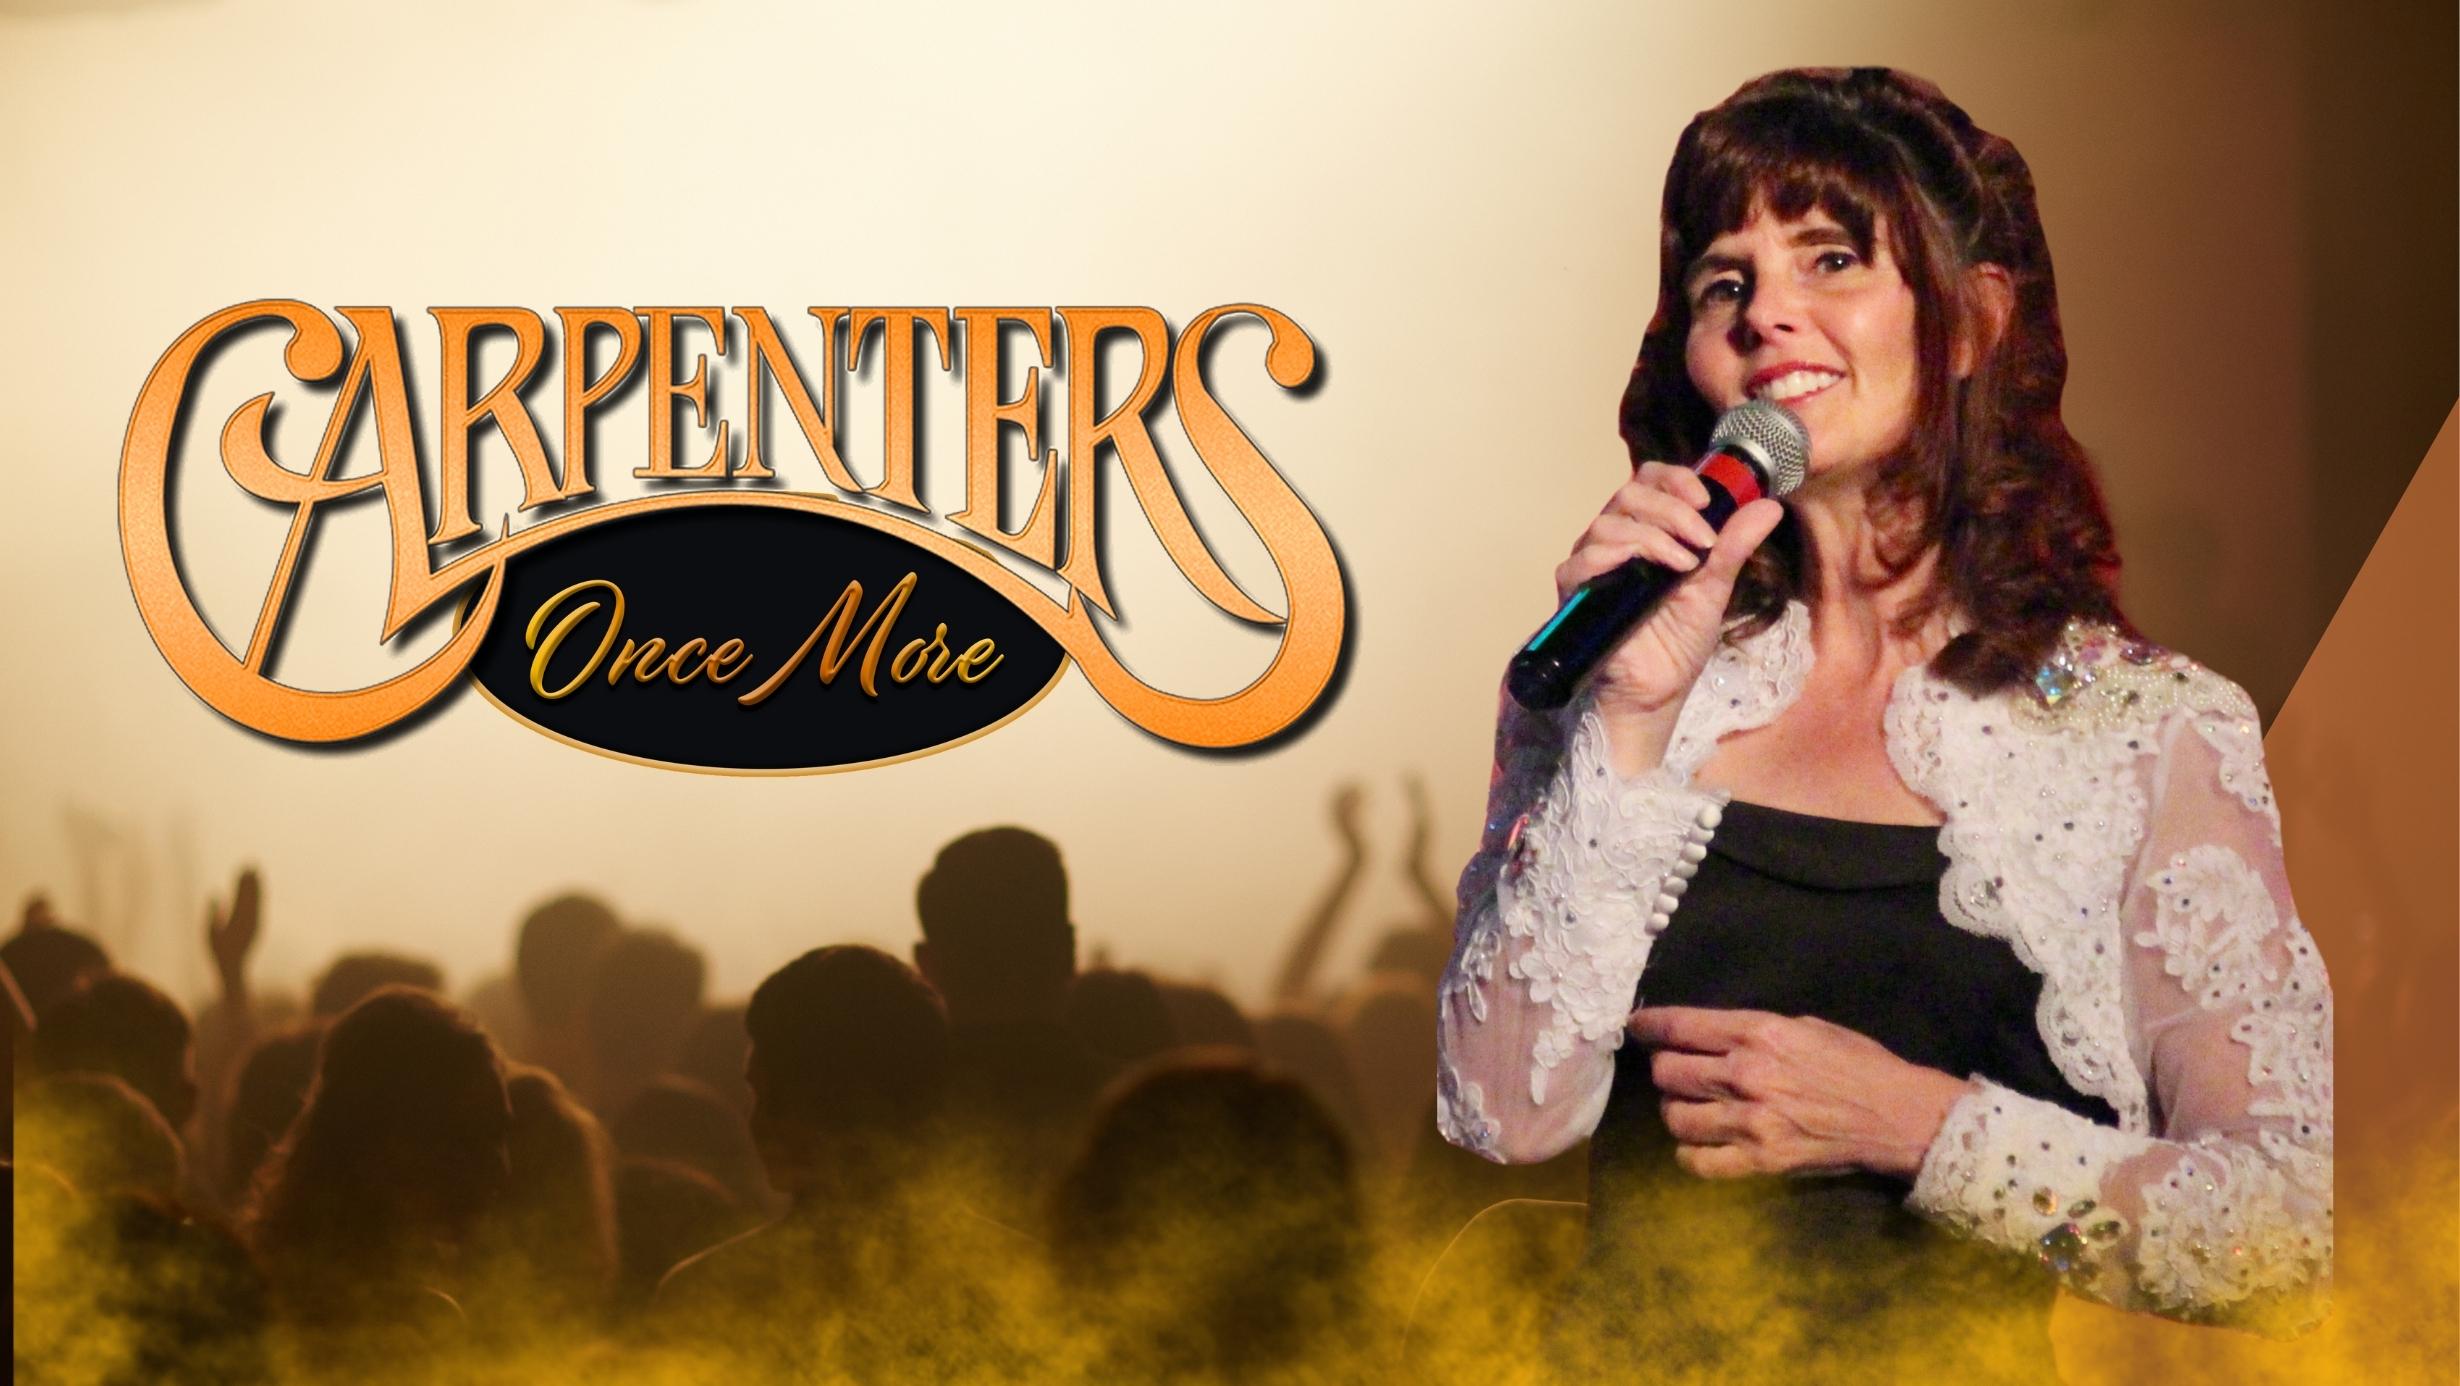 Carpenters Once More Show 2460 × 1386